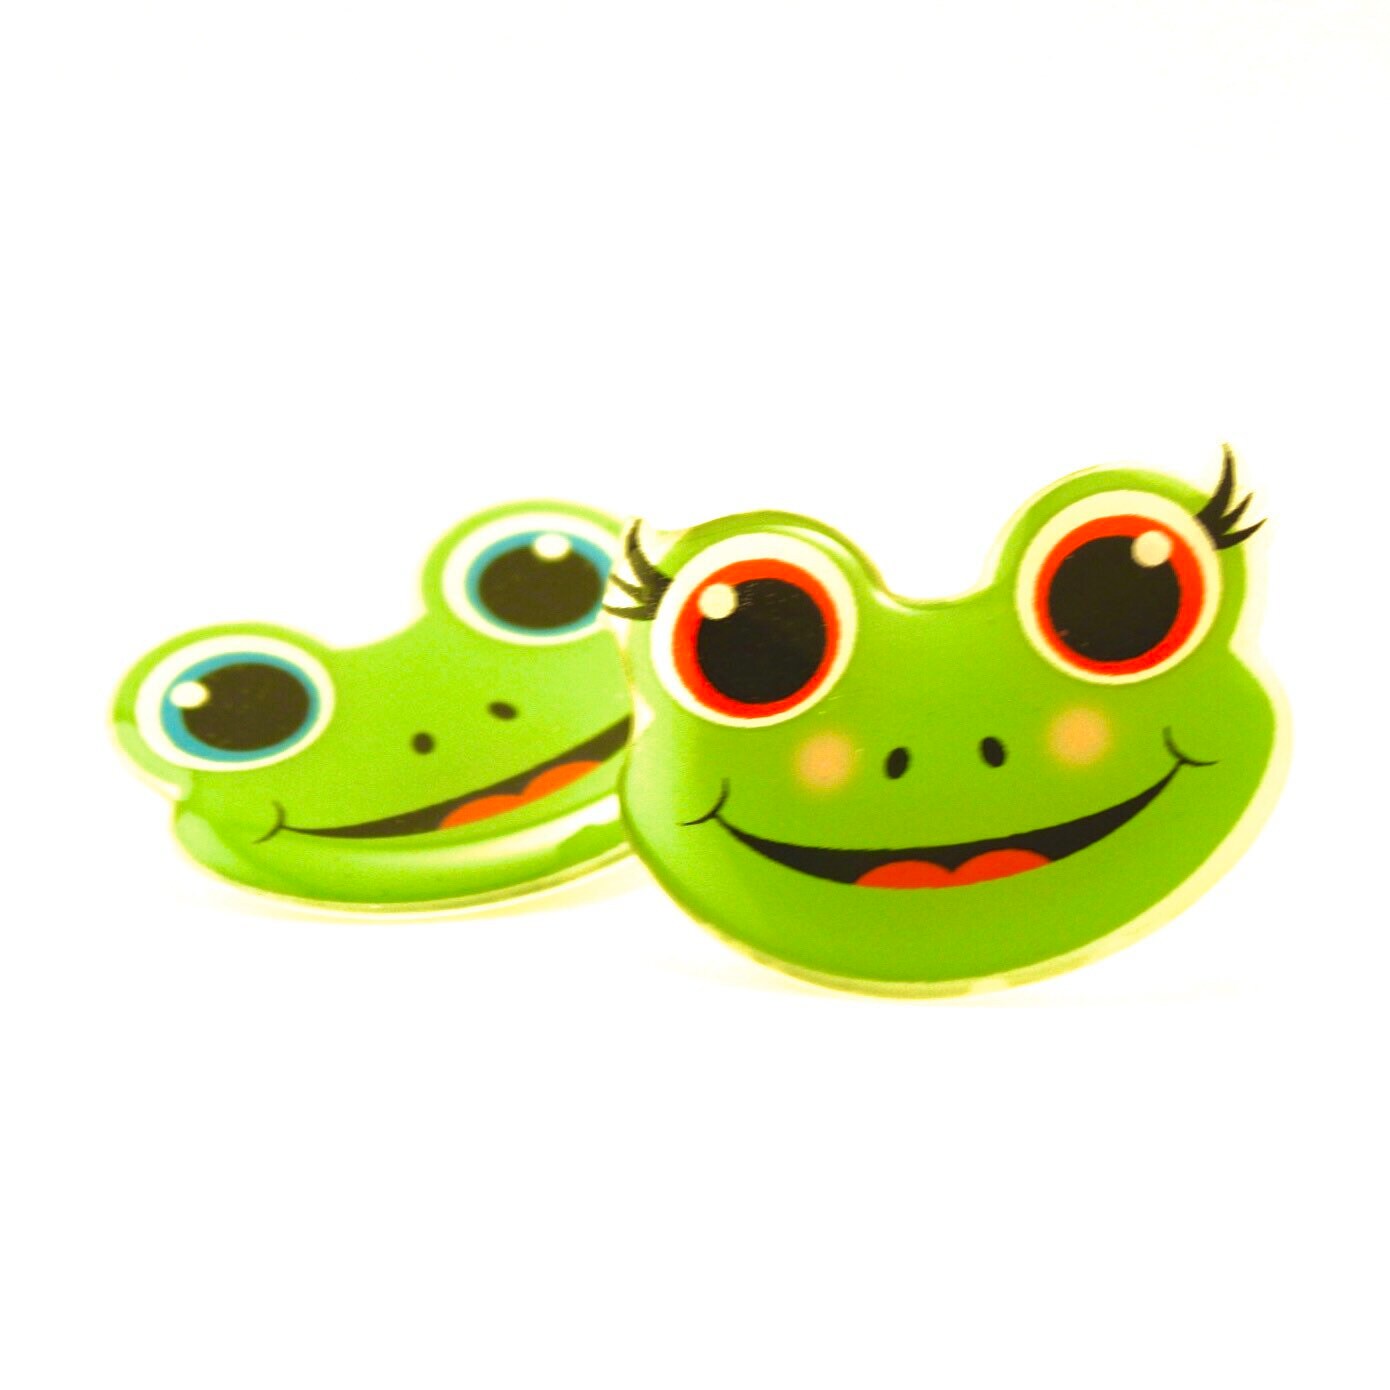 Mr and Mrs Frog Xray Markers Customized with initials